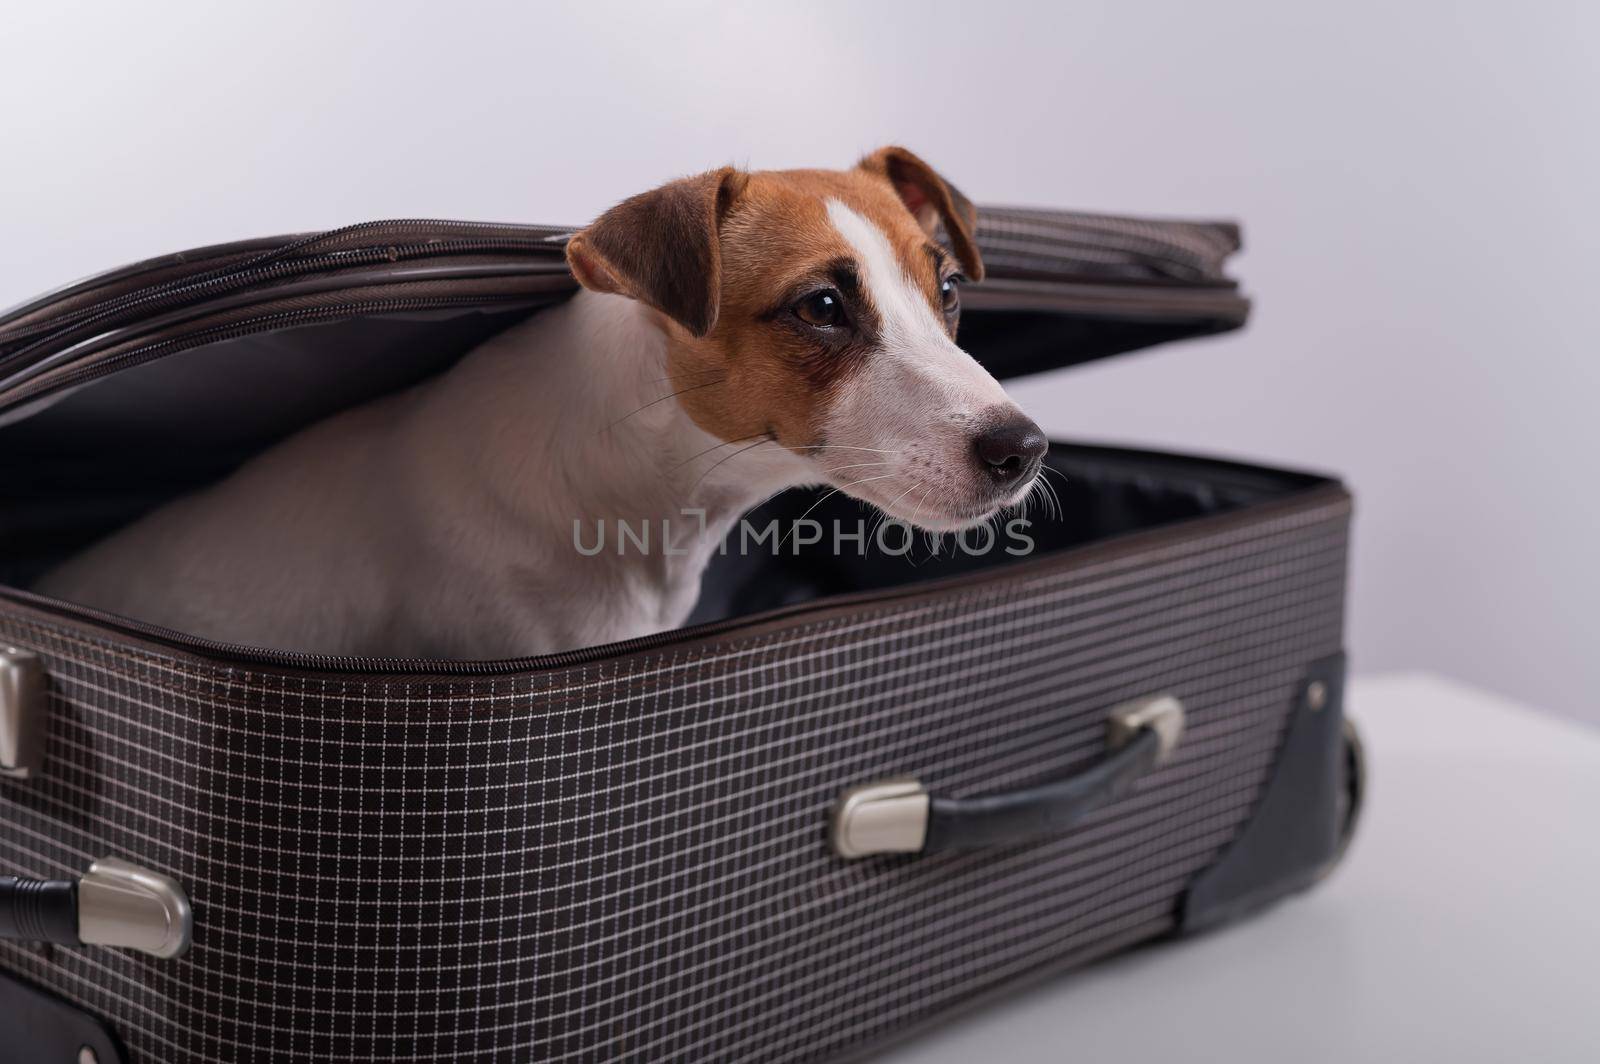 The dog is hiding in a suitcase on a white background. Jack Russell Terrier peeks out of his luggage bag by mrwed54